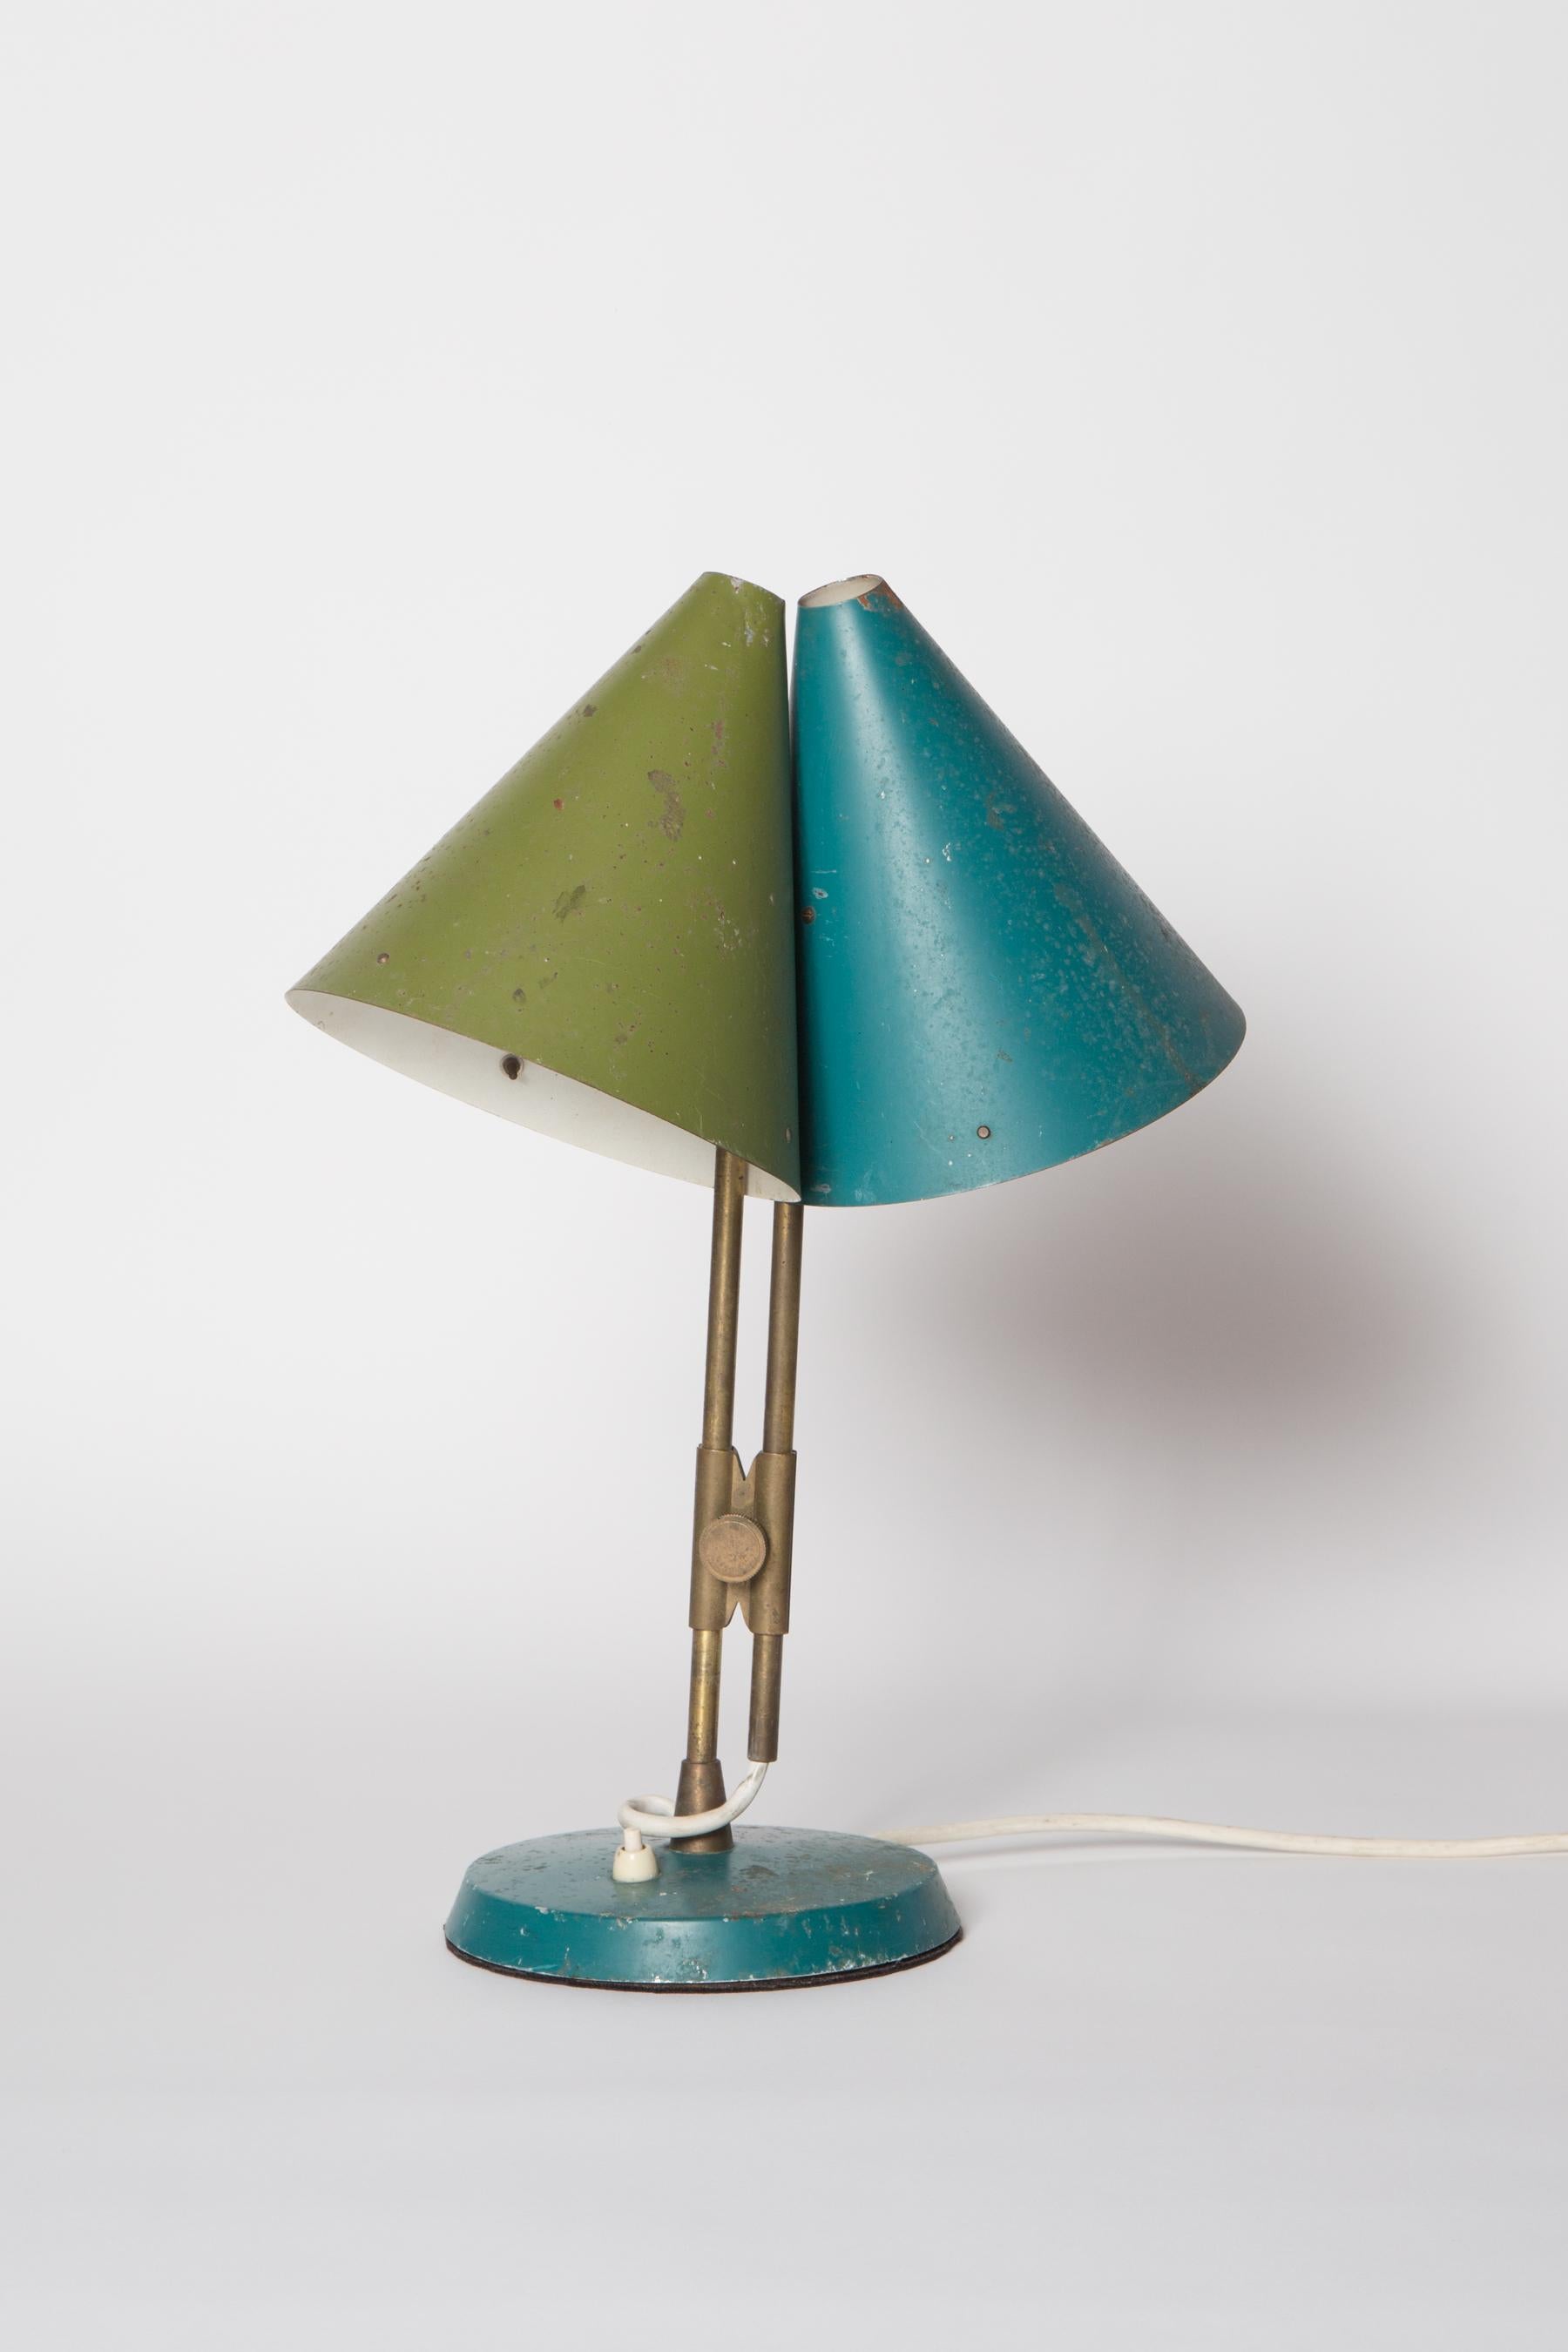 1959 Bent Karlby 'Mosaik' Adjustable Brass & Lacquered Metal Table Lamp for Lyfa 7